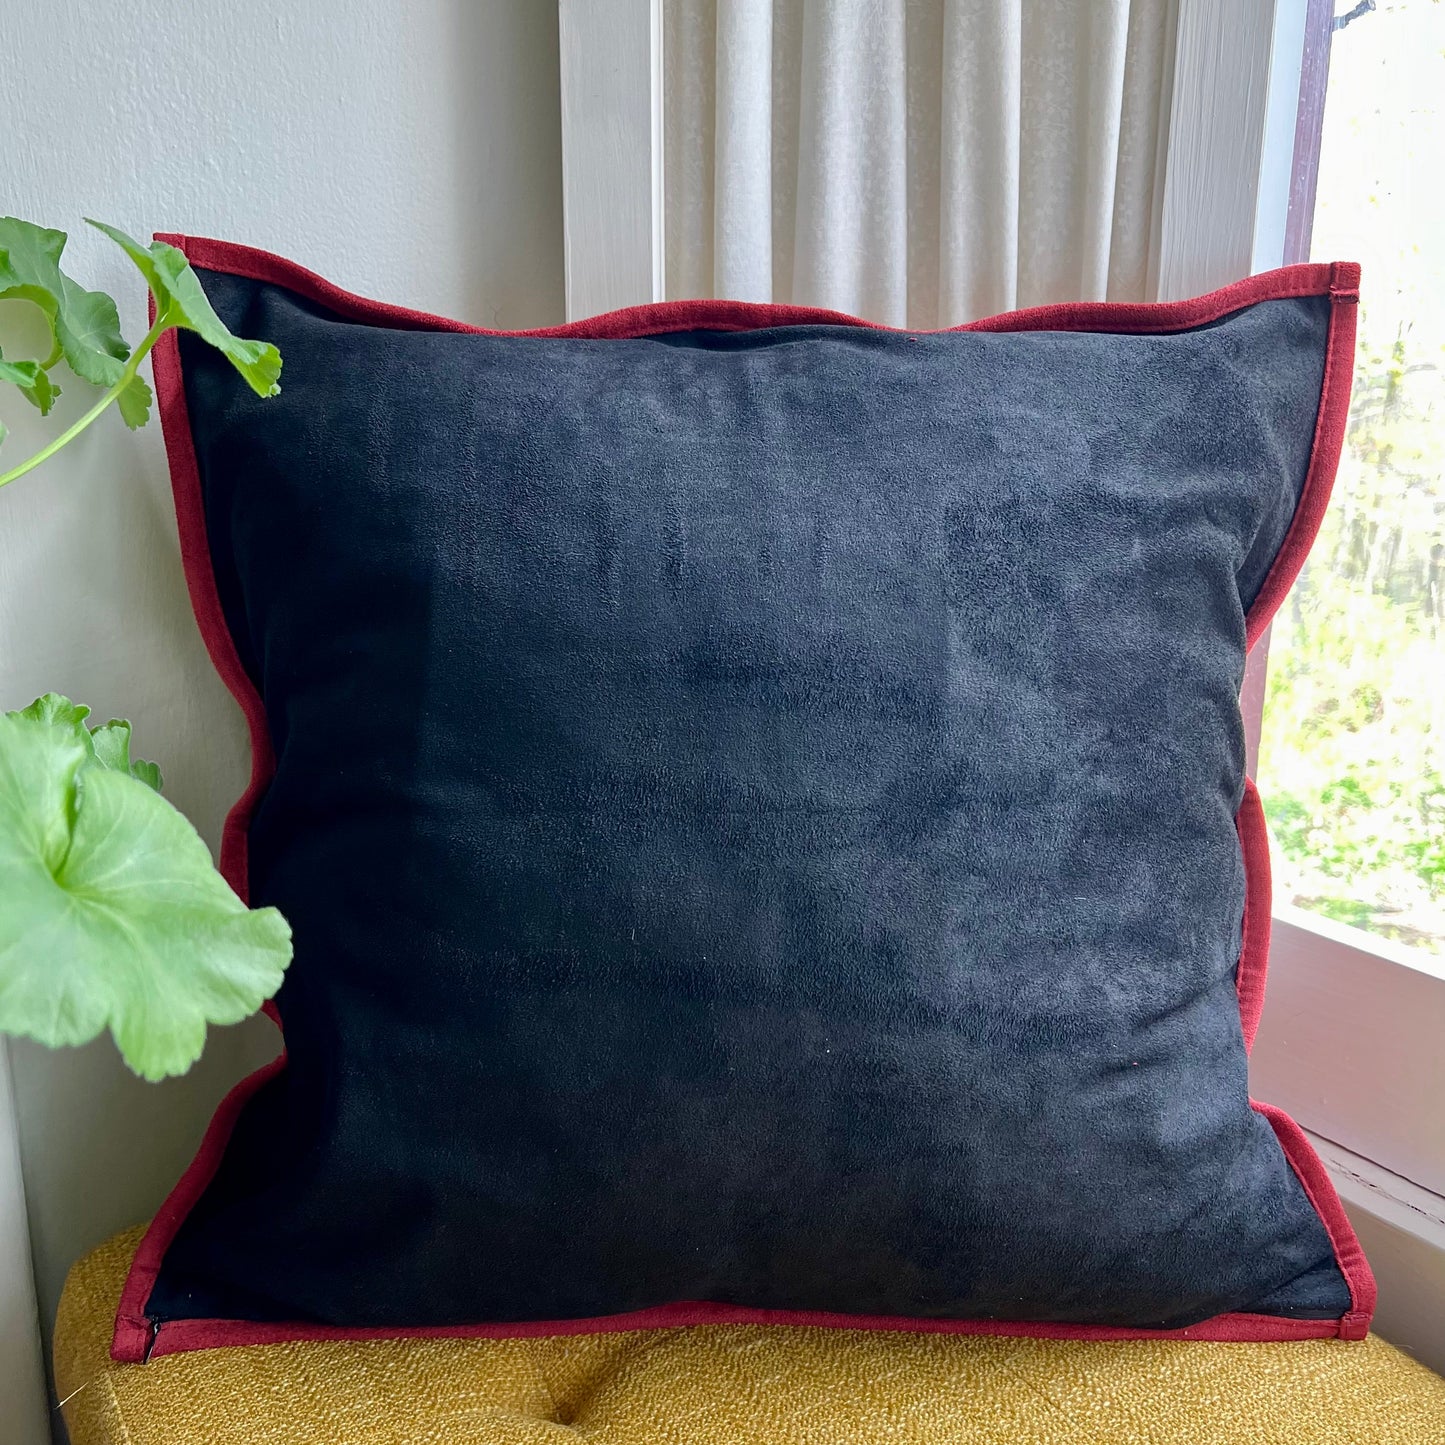 Black and Red Floral Embroidered Pillow Cover